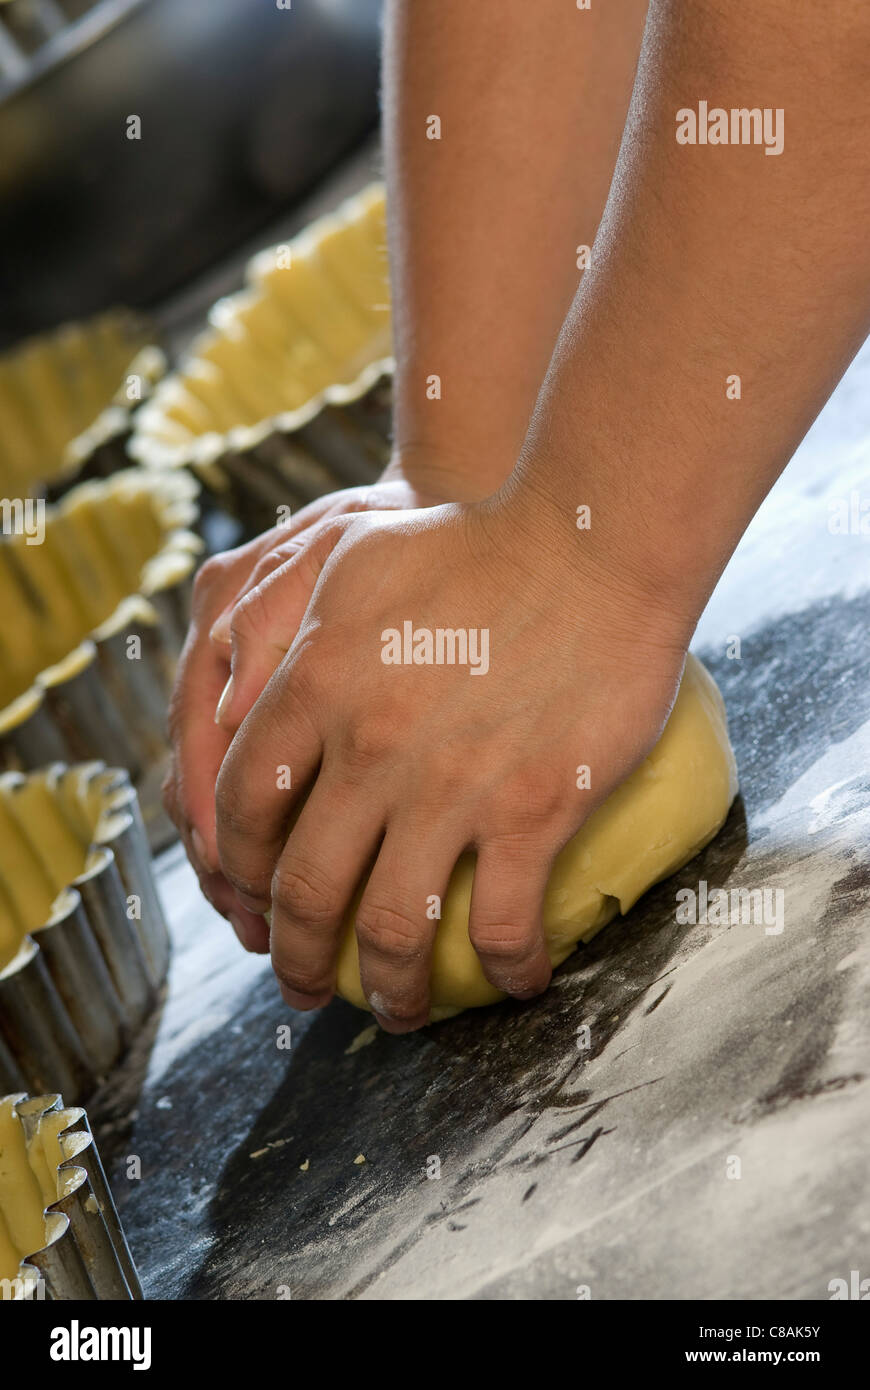 Person kneading pastry dough Stock Photo